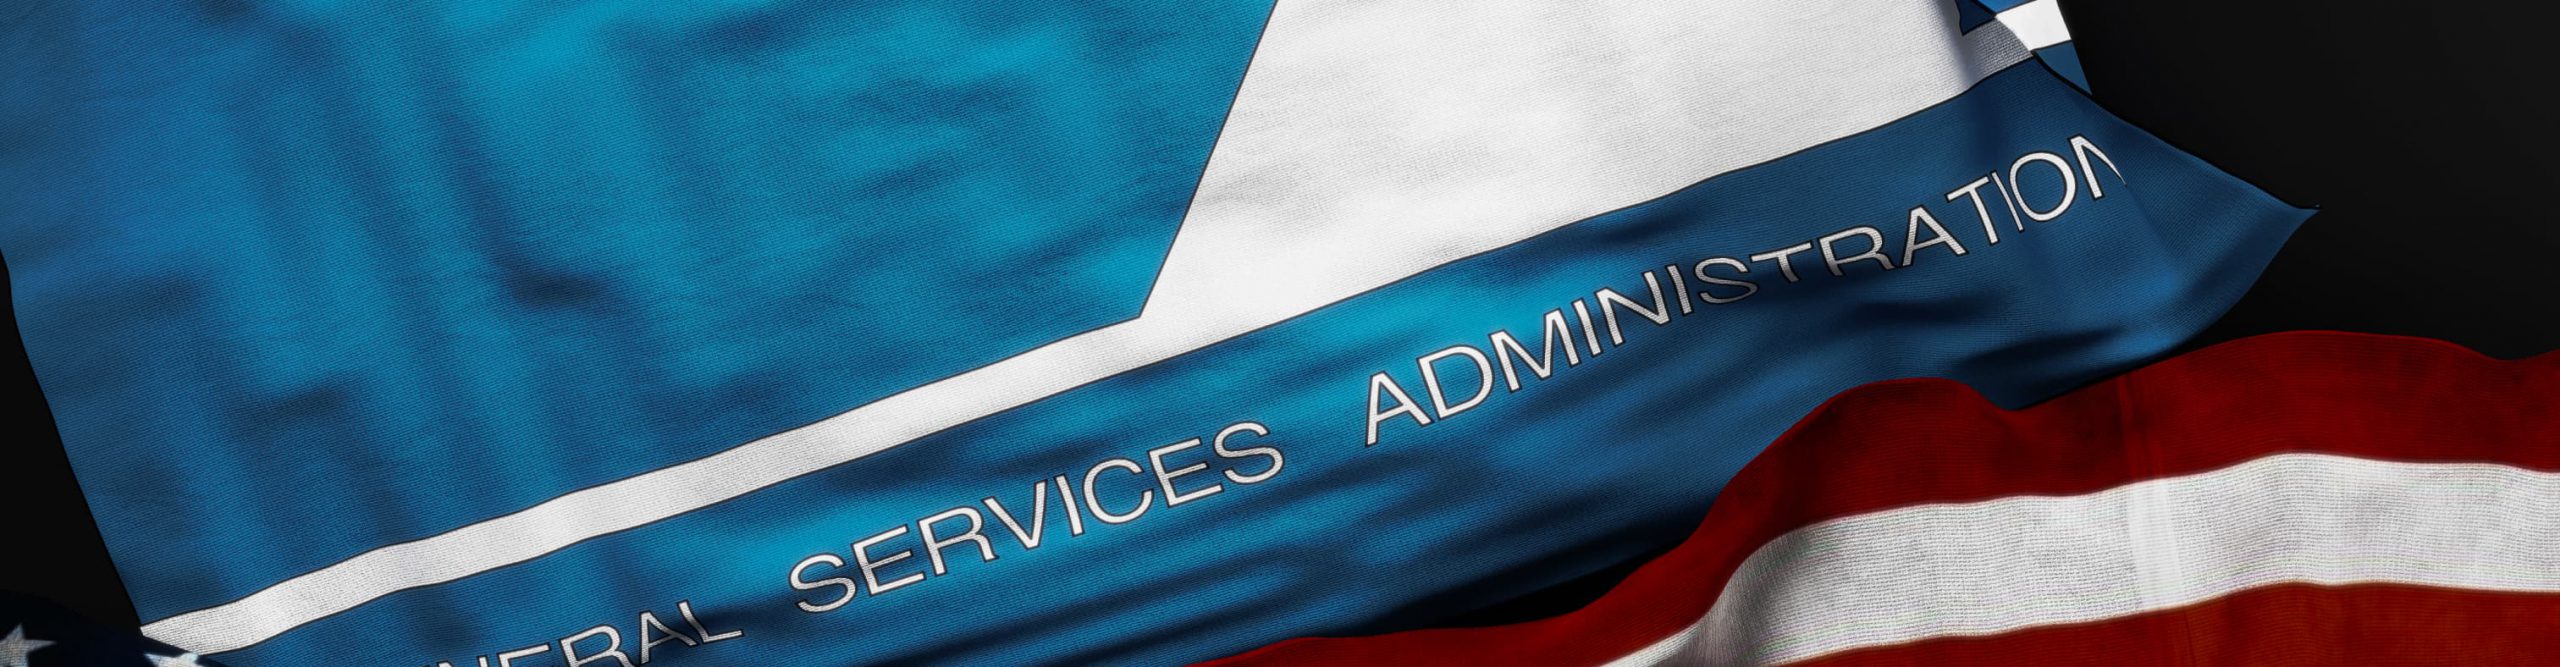 Banner of General Services Administration